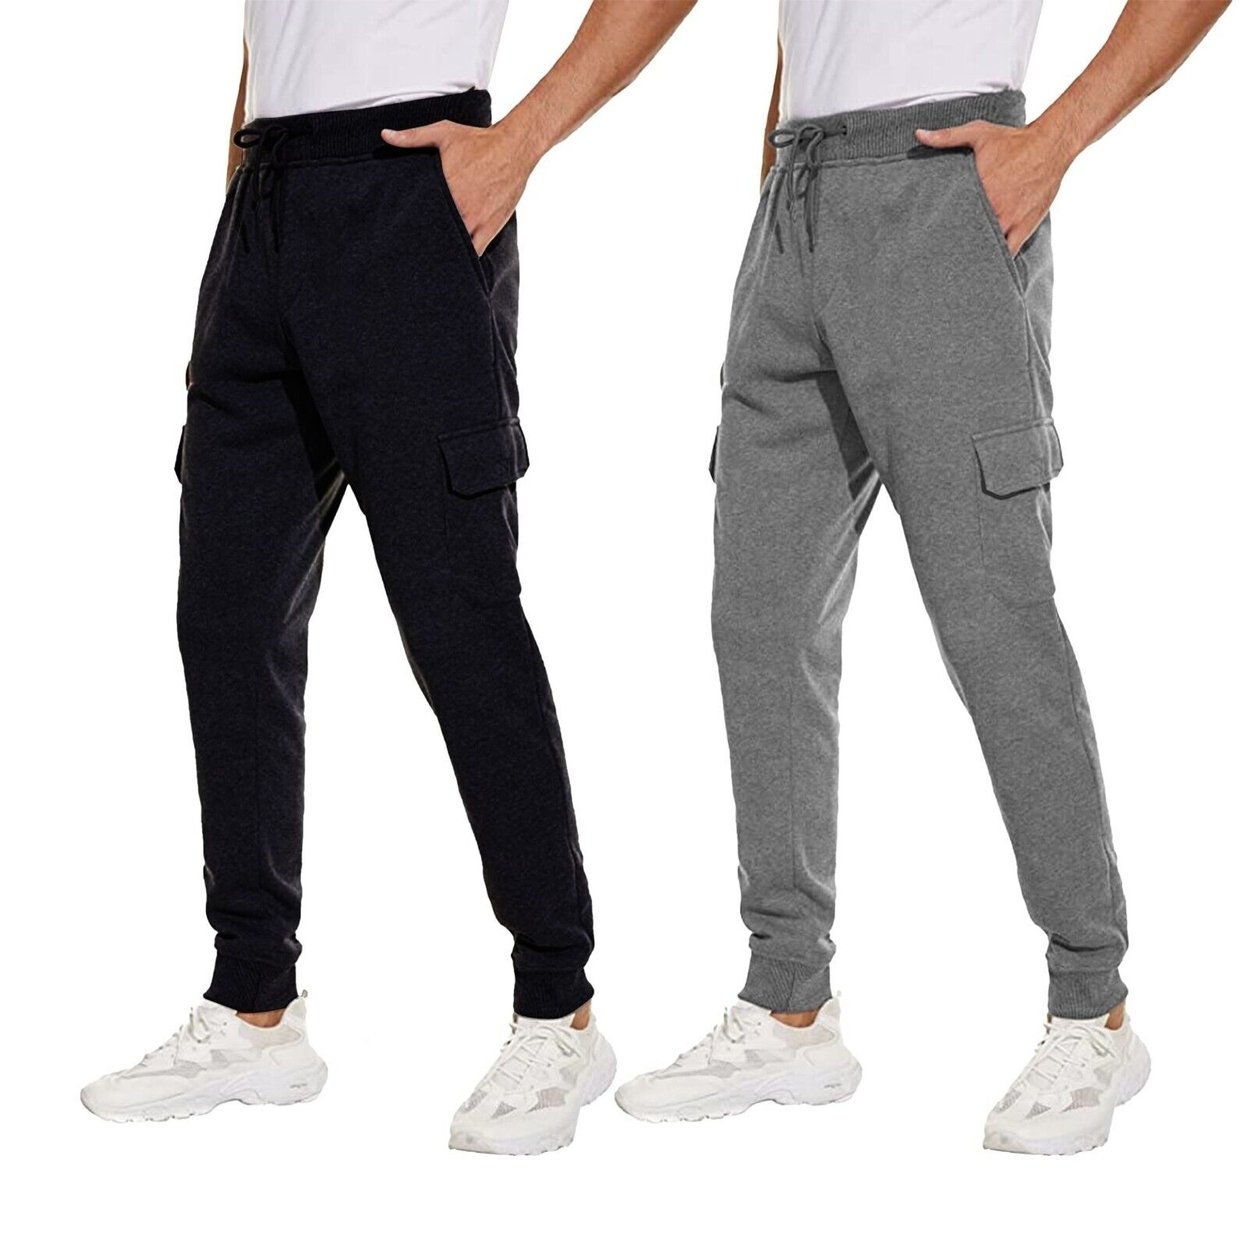 2-Pack Men's Ultra Soft Winter Warm Thick Athletic Sherpa Lined Jogger Pants - Black&grey, Large